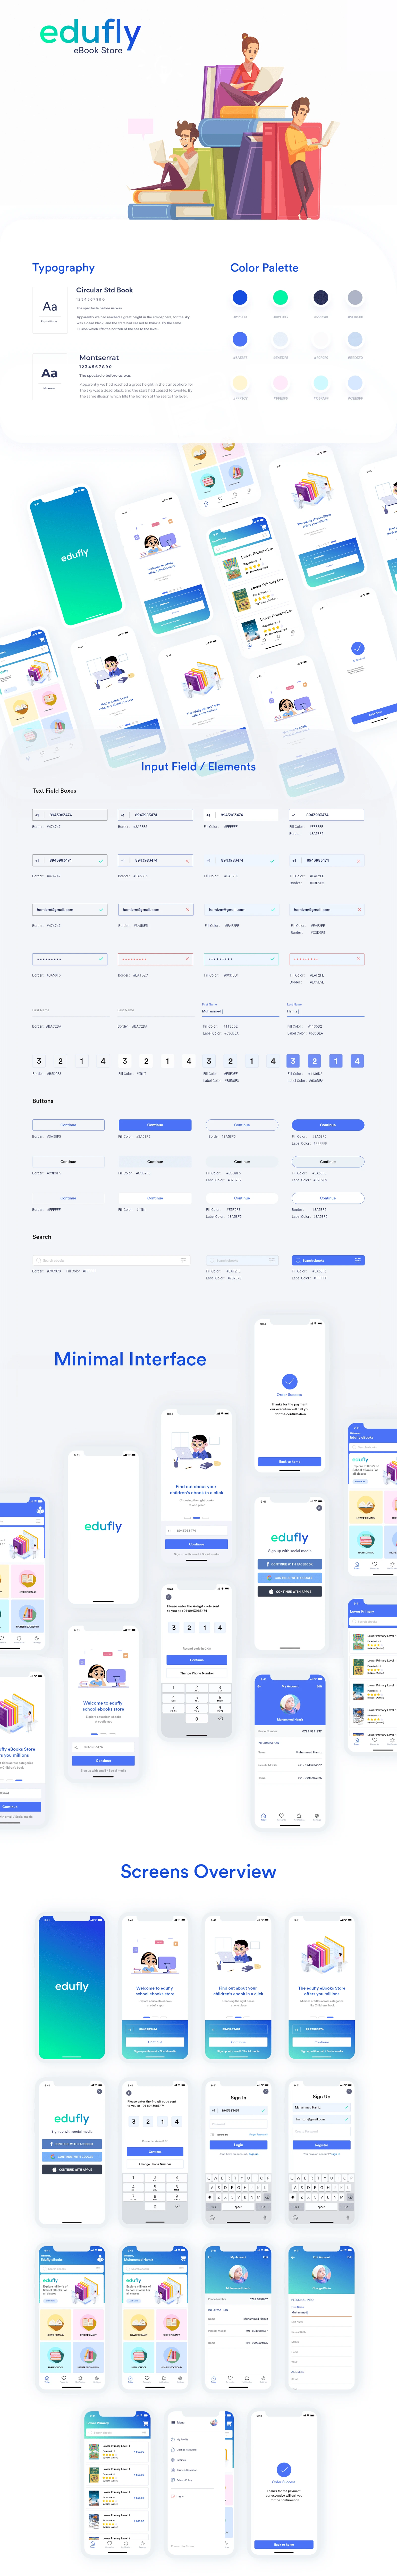 Edufly - Online eBook Store UI Kit for Adobe XD - Edufly is a iOS UI kit that helps create beautiful, minimal app UI using human-friendly design. This UI Kit will enable you to build almost any design with the out-of-the-box building blocks that is available in the edufly UI Design.